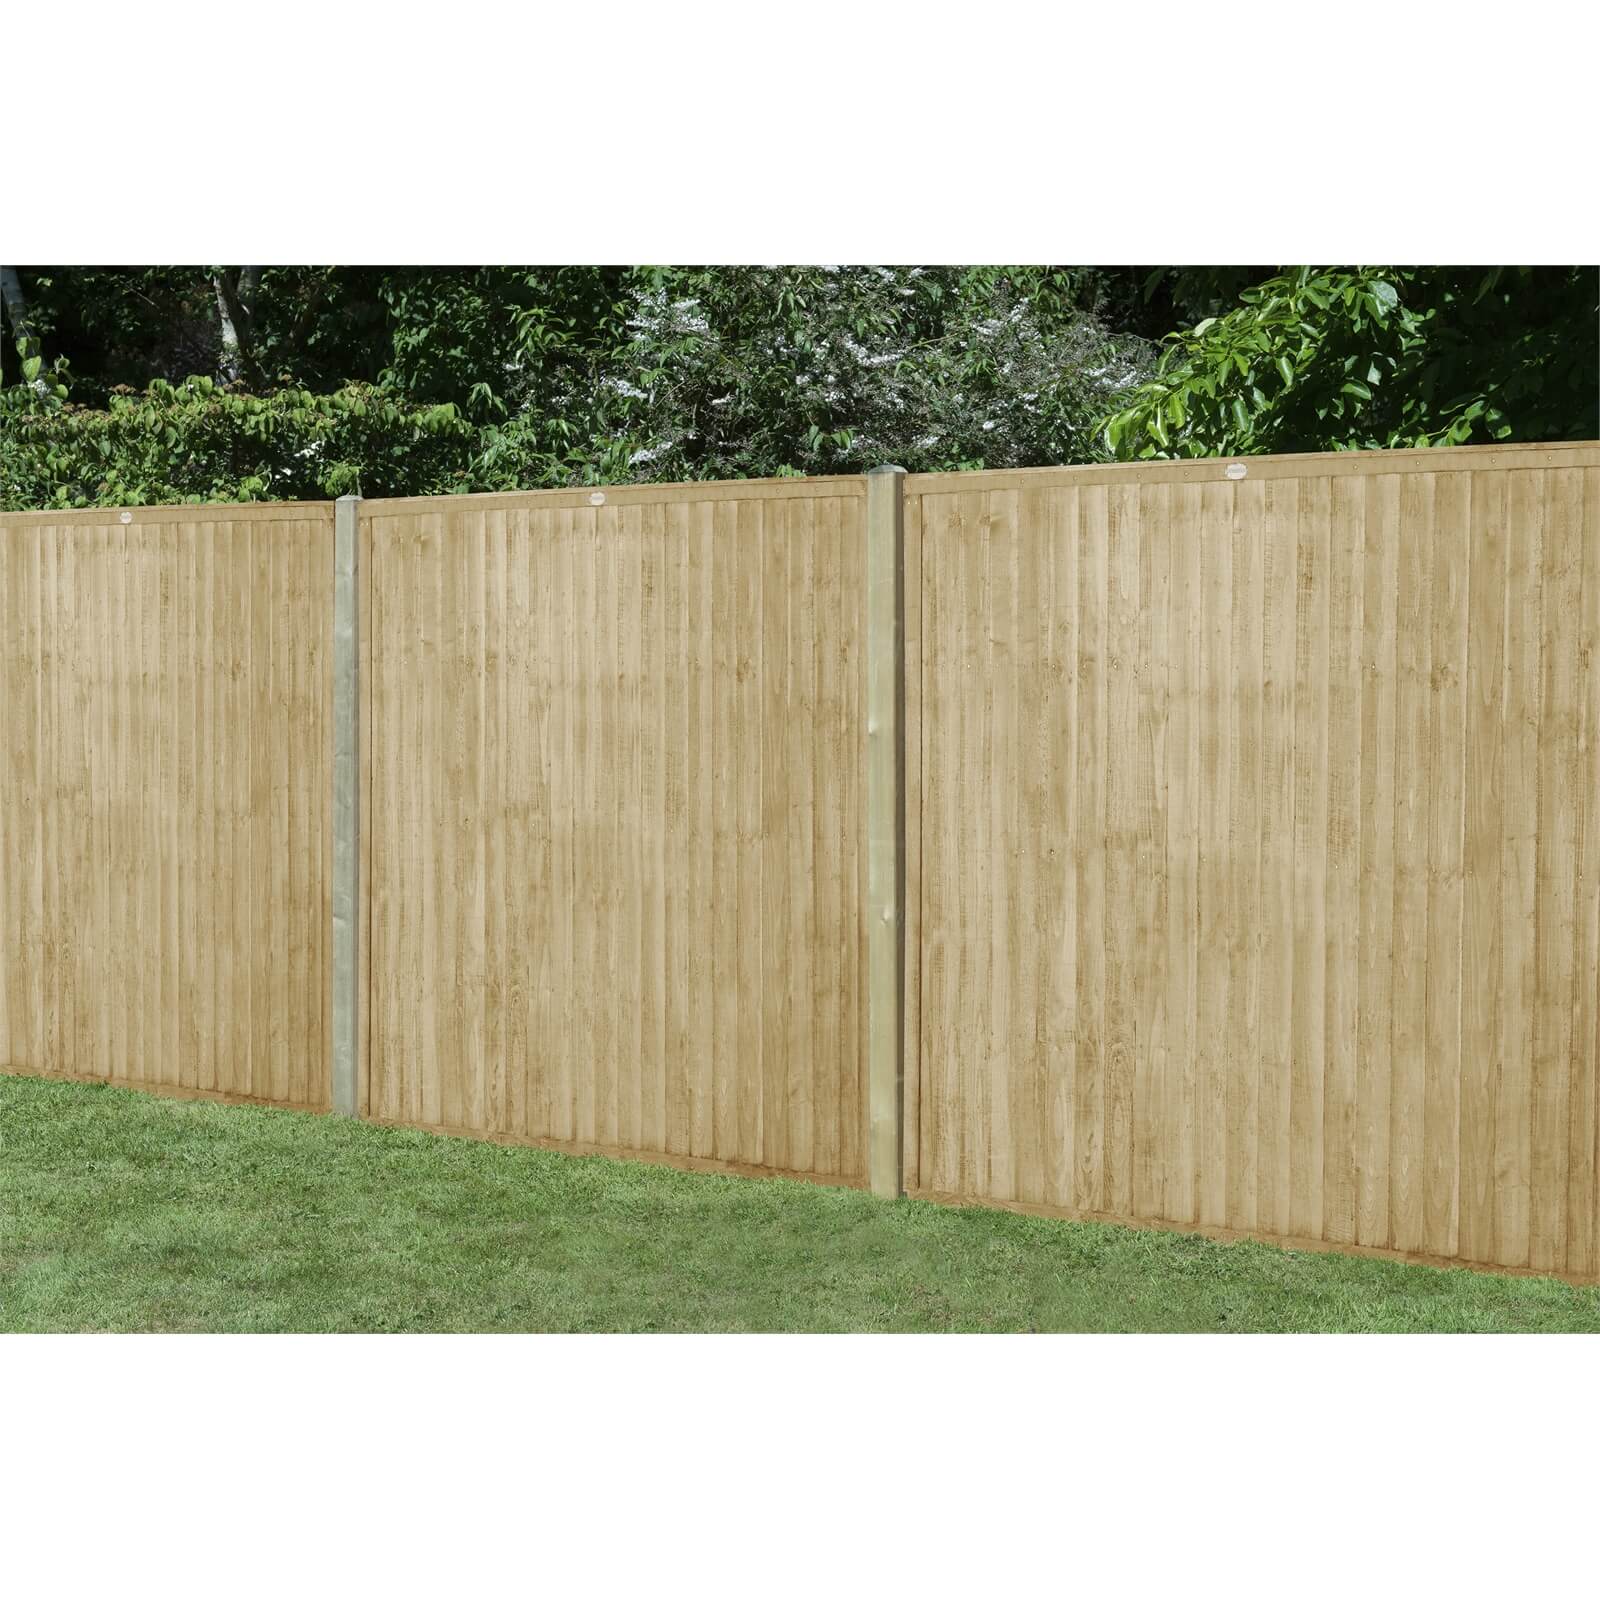 6ft x 5ft (1.83m x 1.52m) Pressure Treated Closeboard Fence Panel - Pack of 3